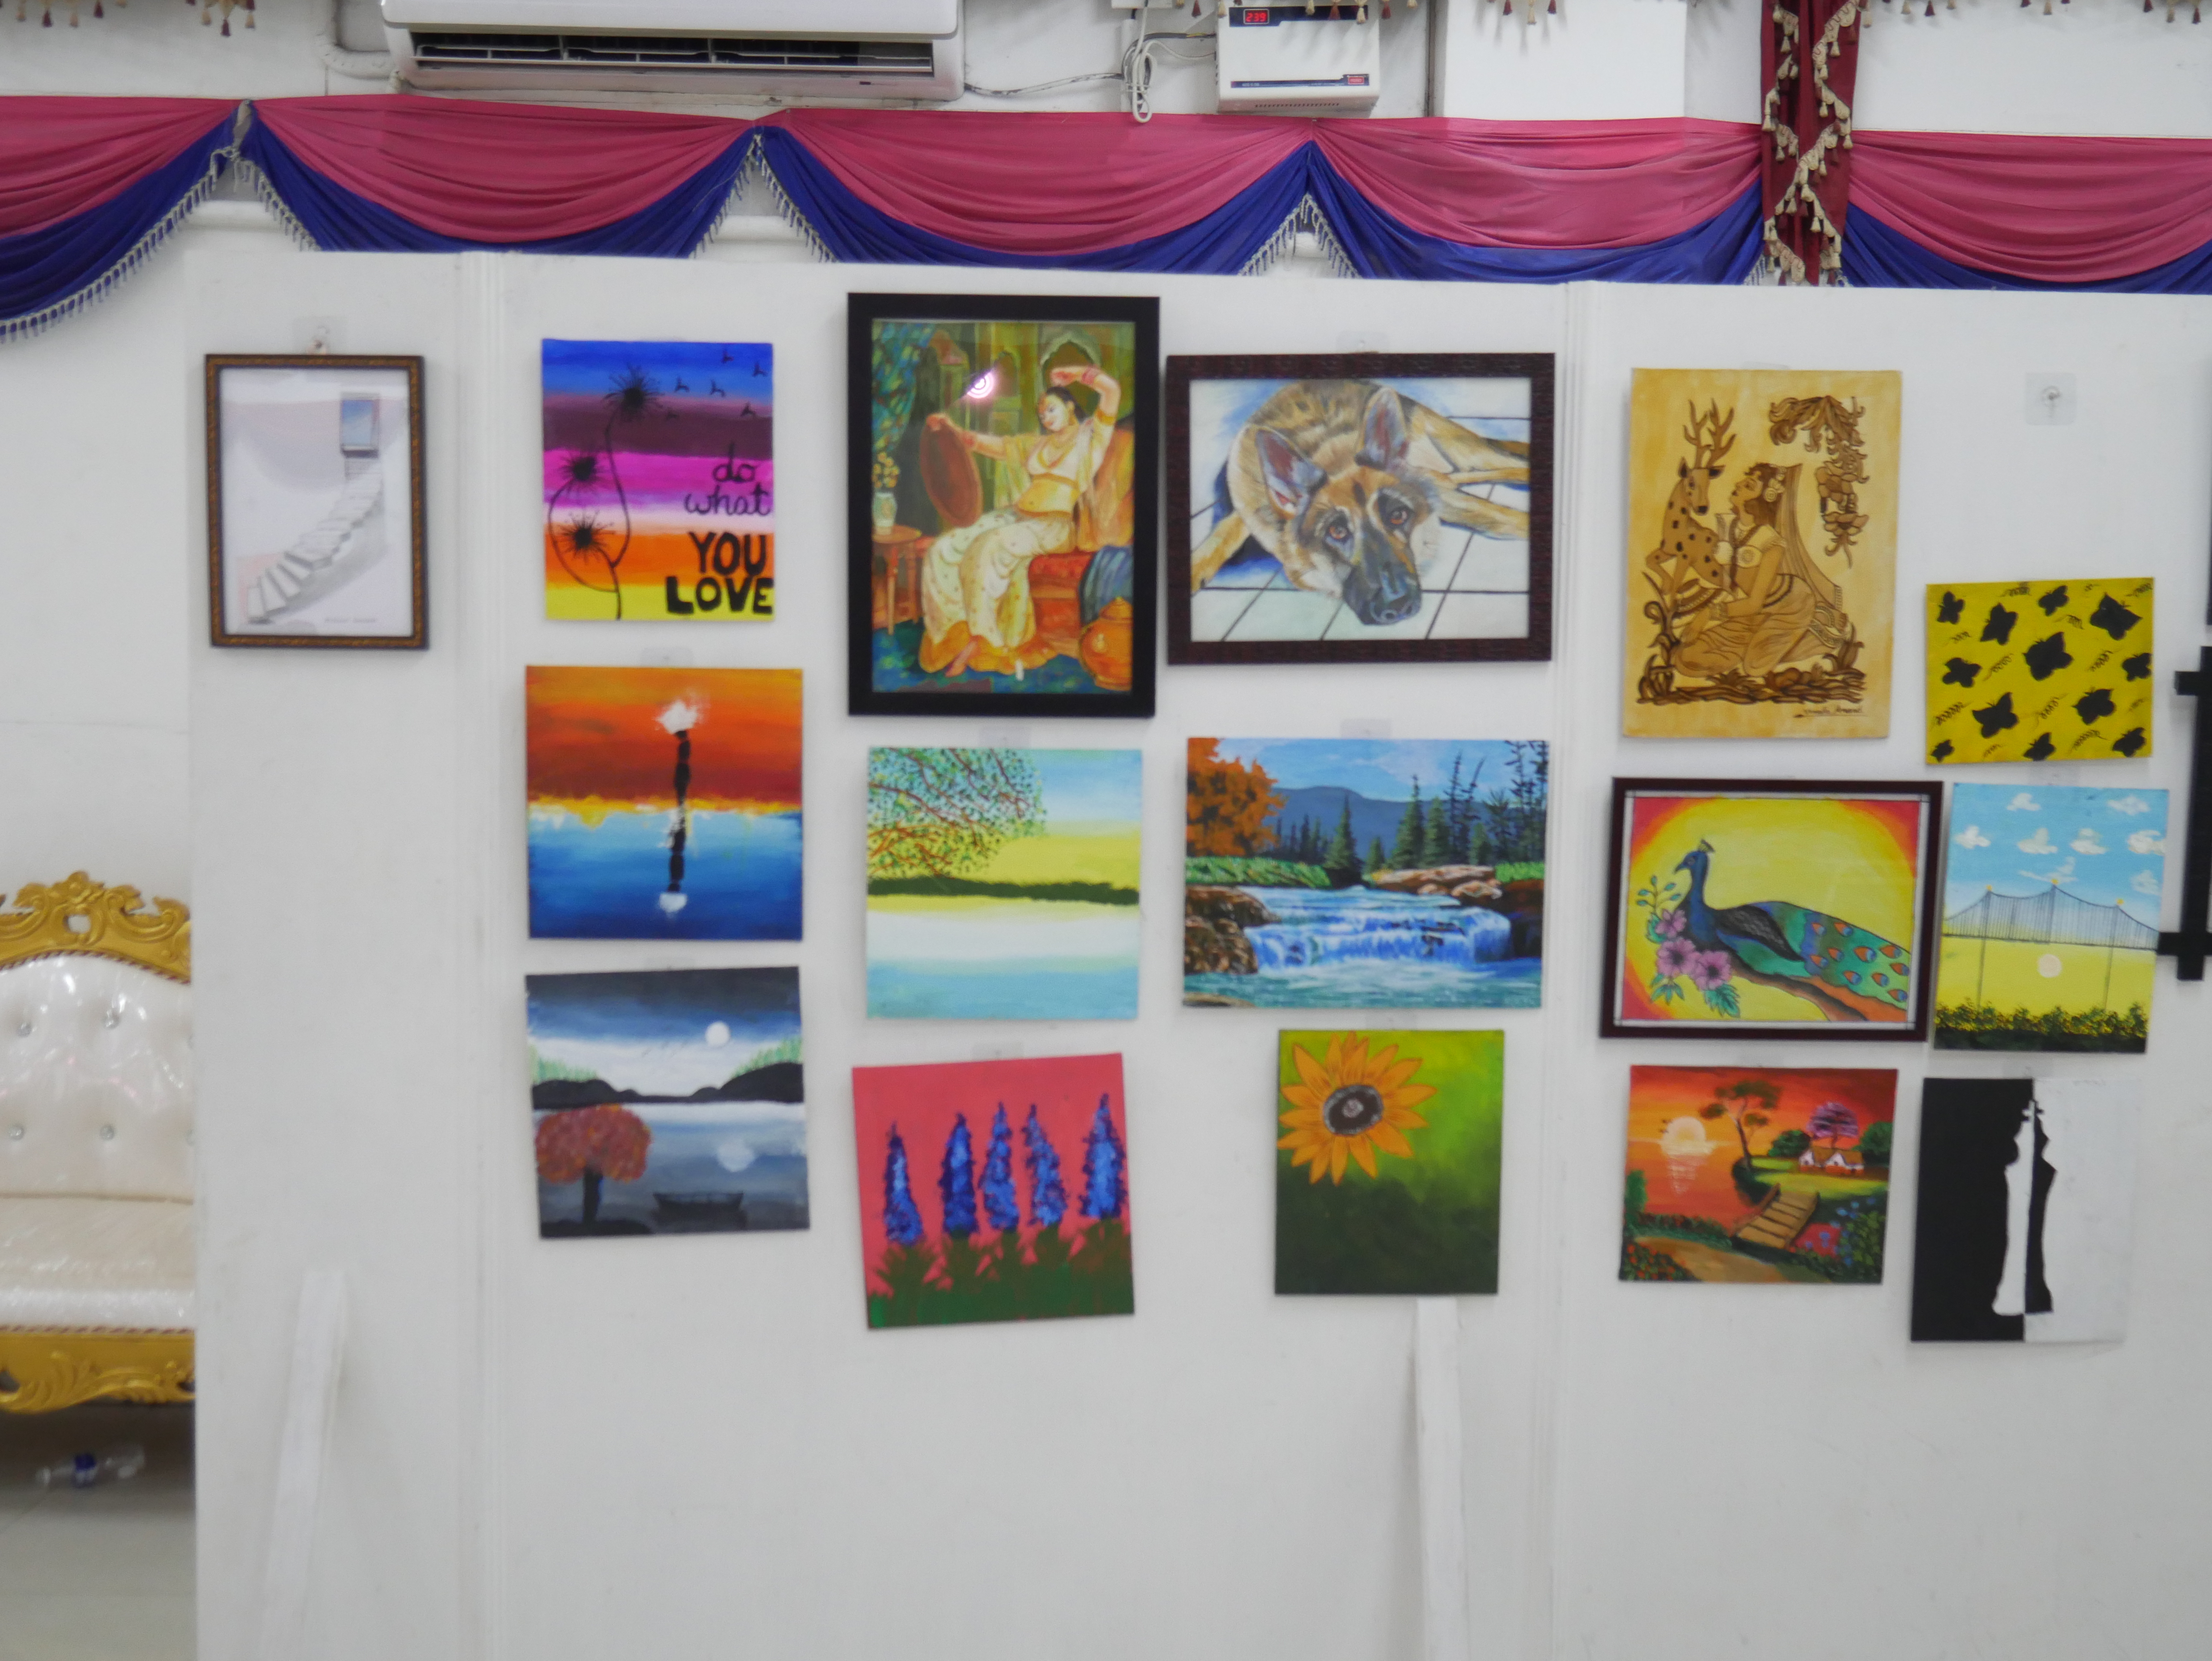 World Record by organising 76 drawings under the topic  " Chithiram Pesuthadi" and participating in "International Cultural Fest 2023-24".